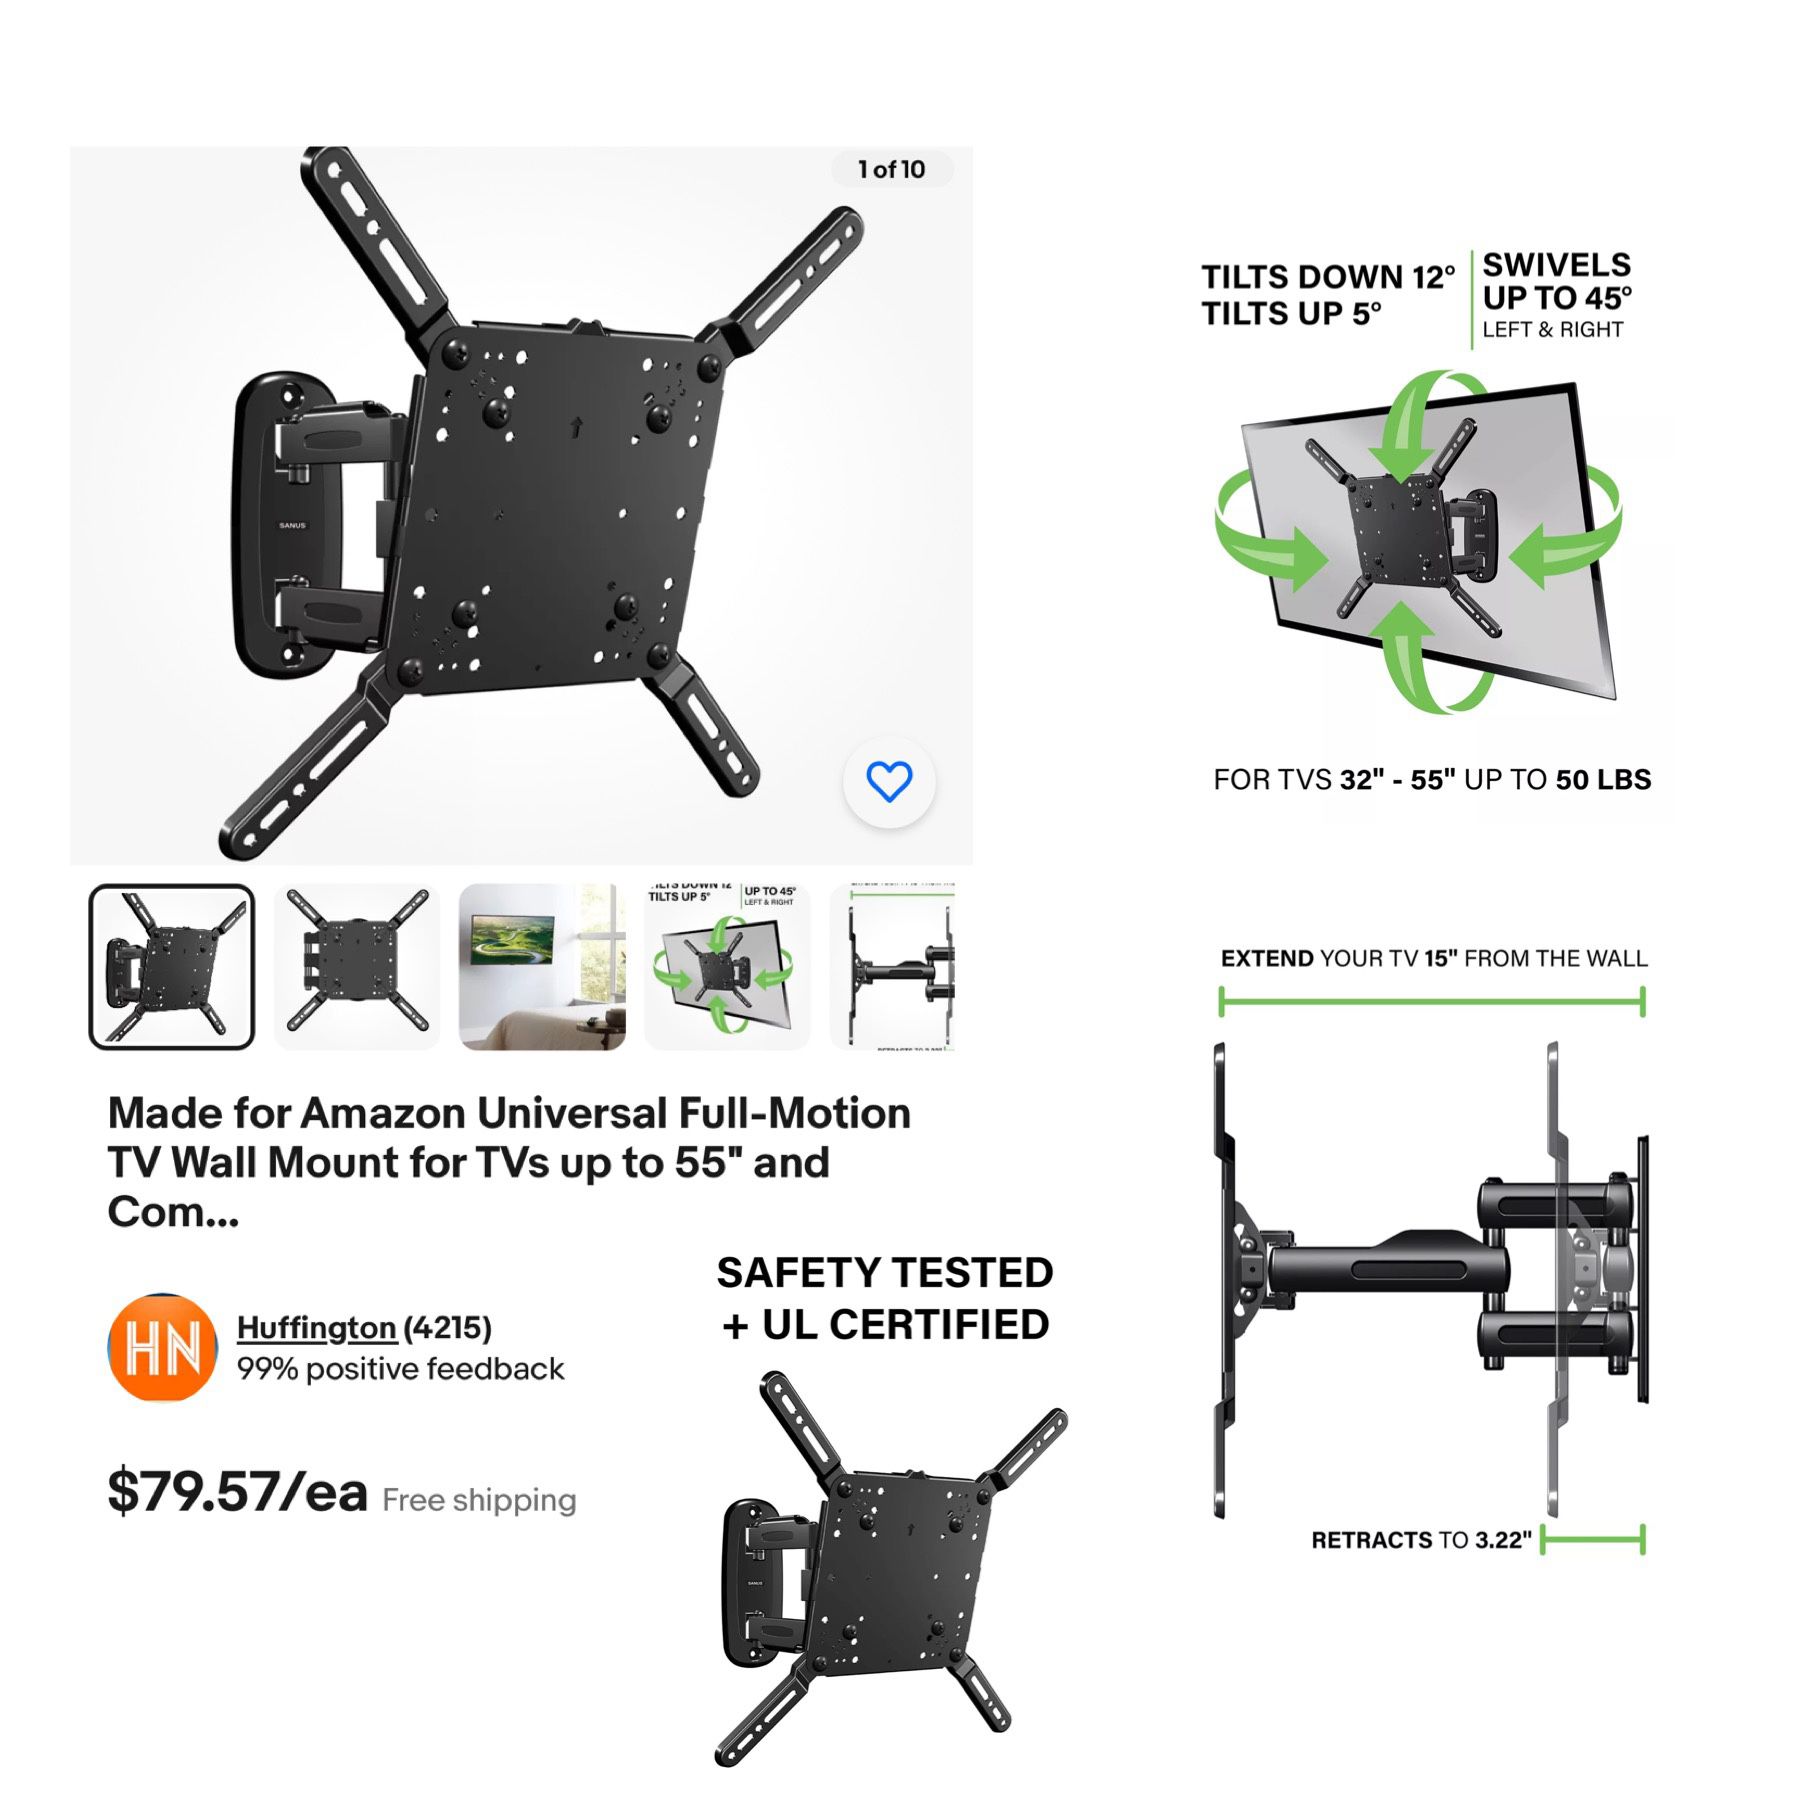 Made For Amazon Universal Full-Motion TV Wall Mount For TVs Up To 55" And Compatible With Amazon Fire TVs